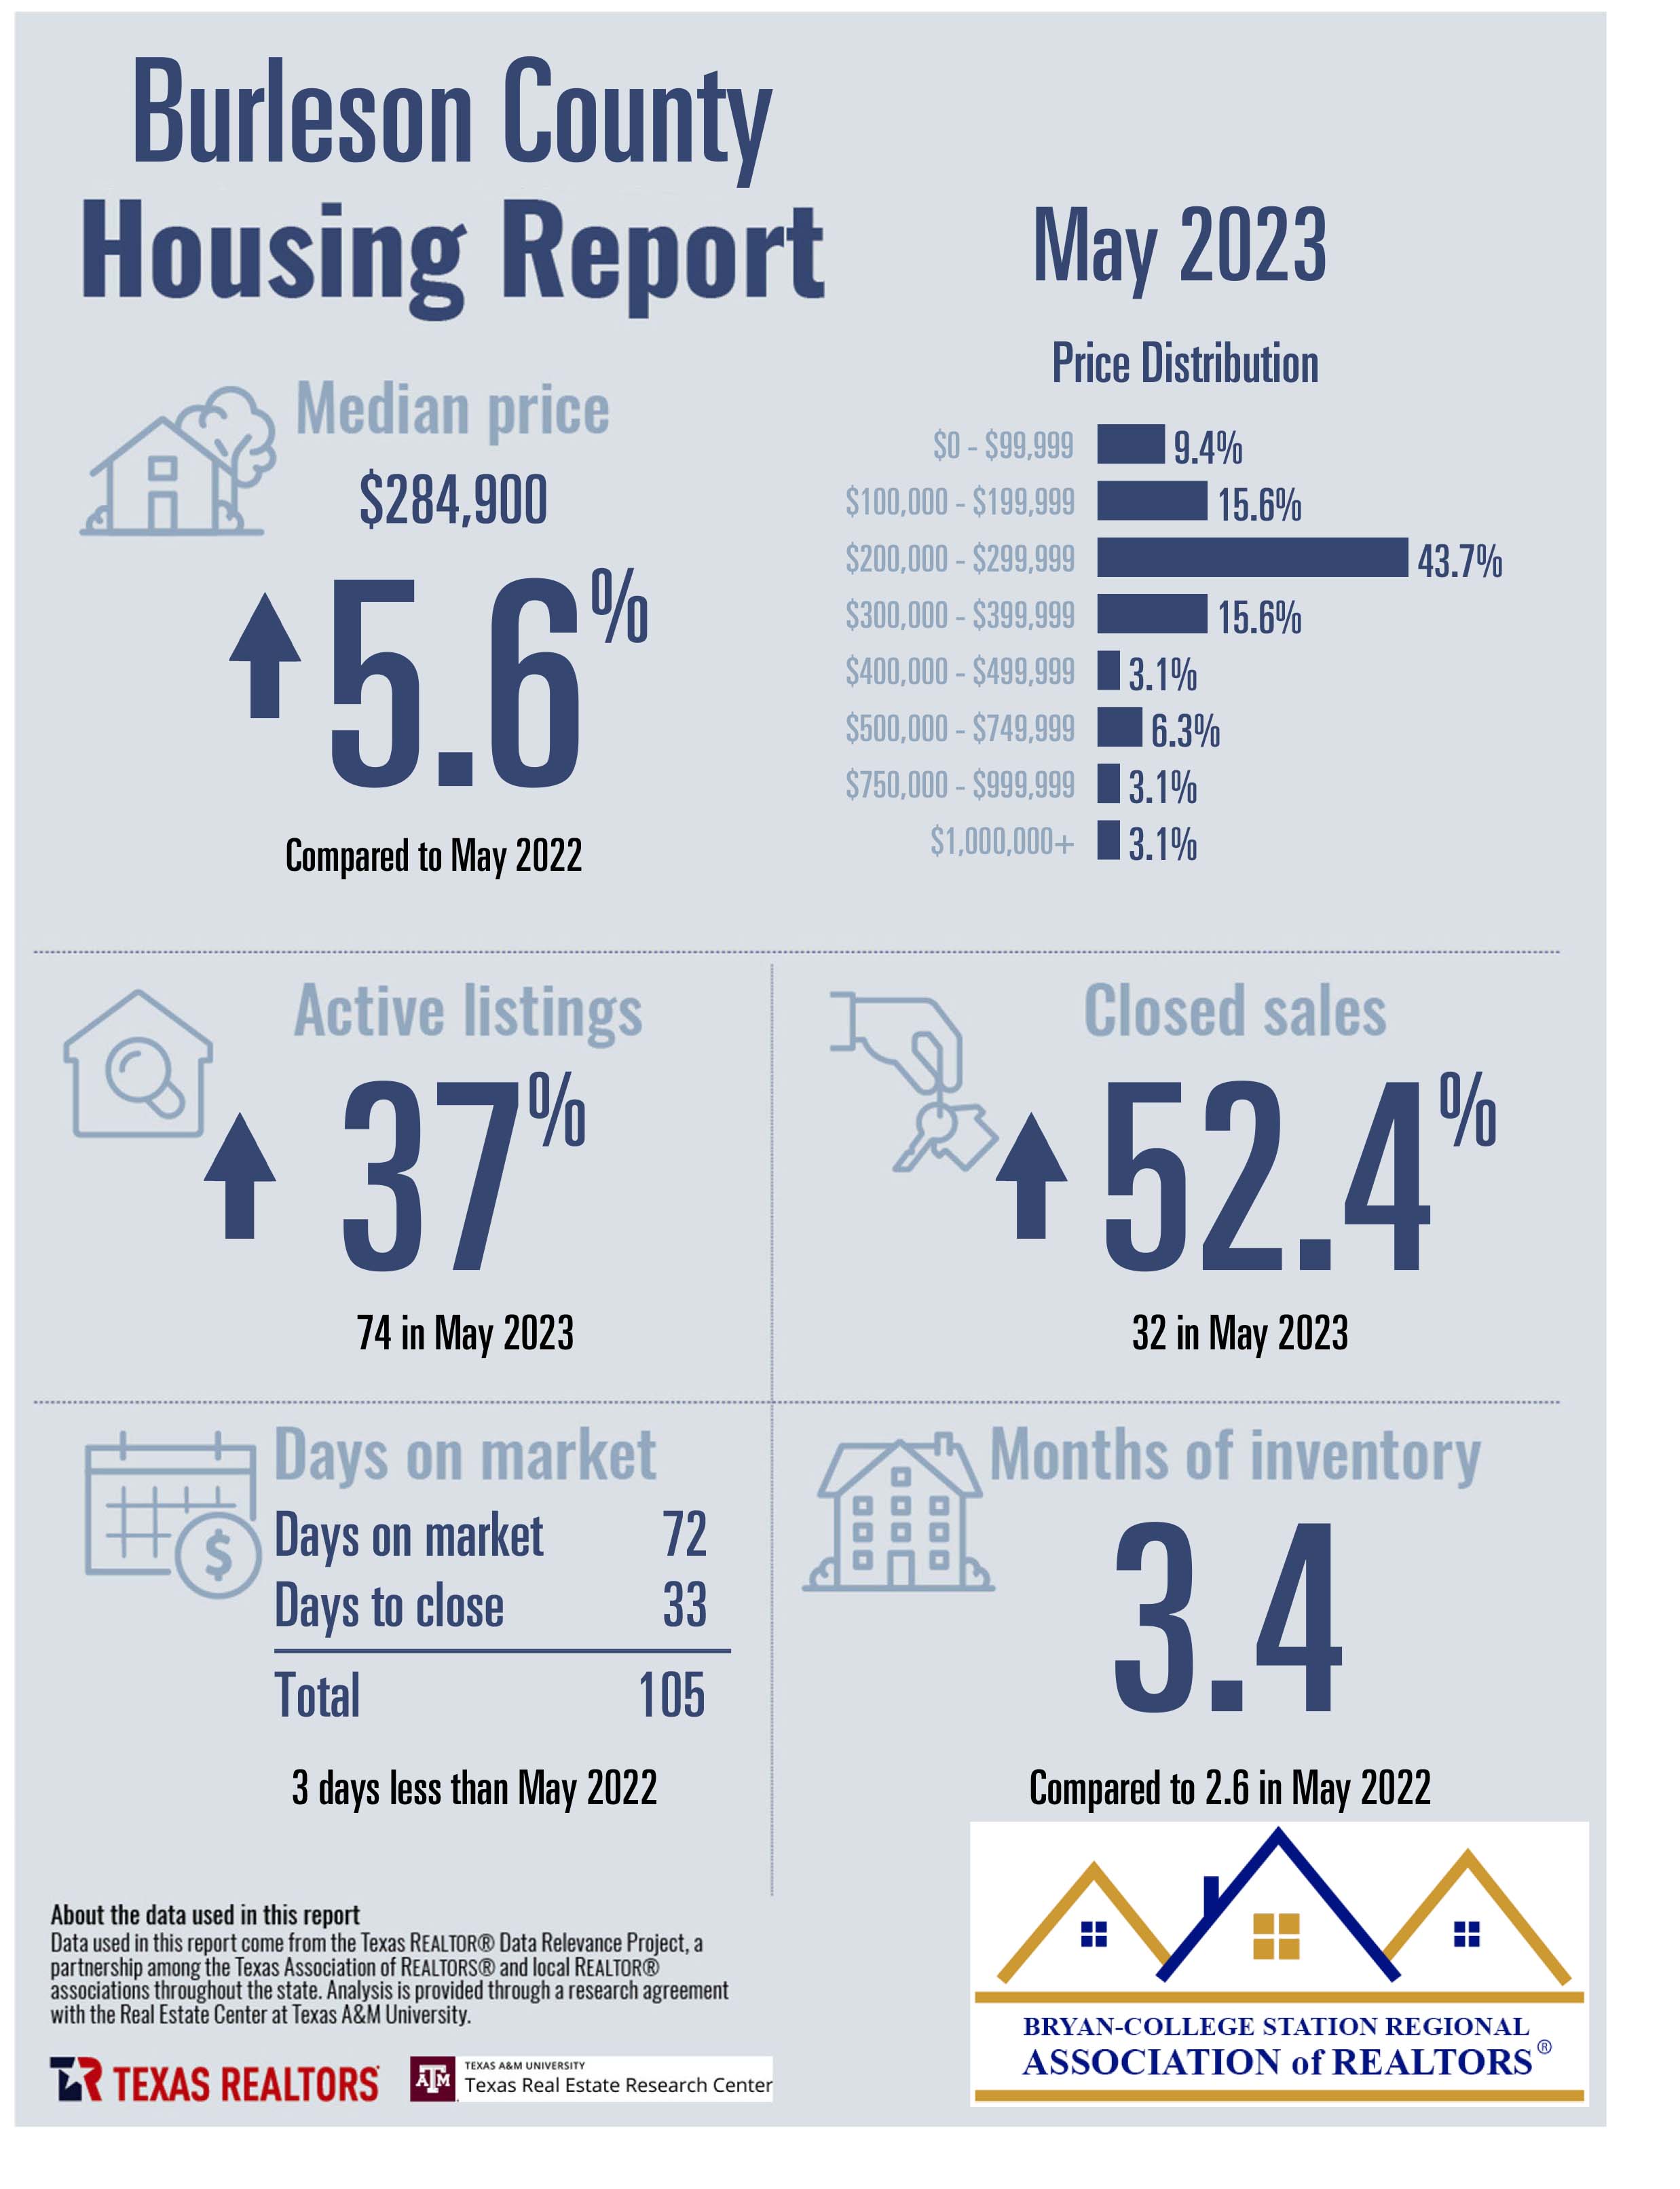 Residential Home Sale Report may 2023 - Burleson